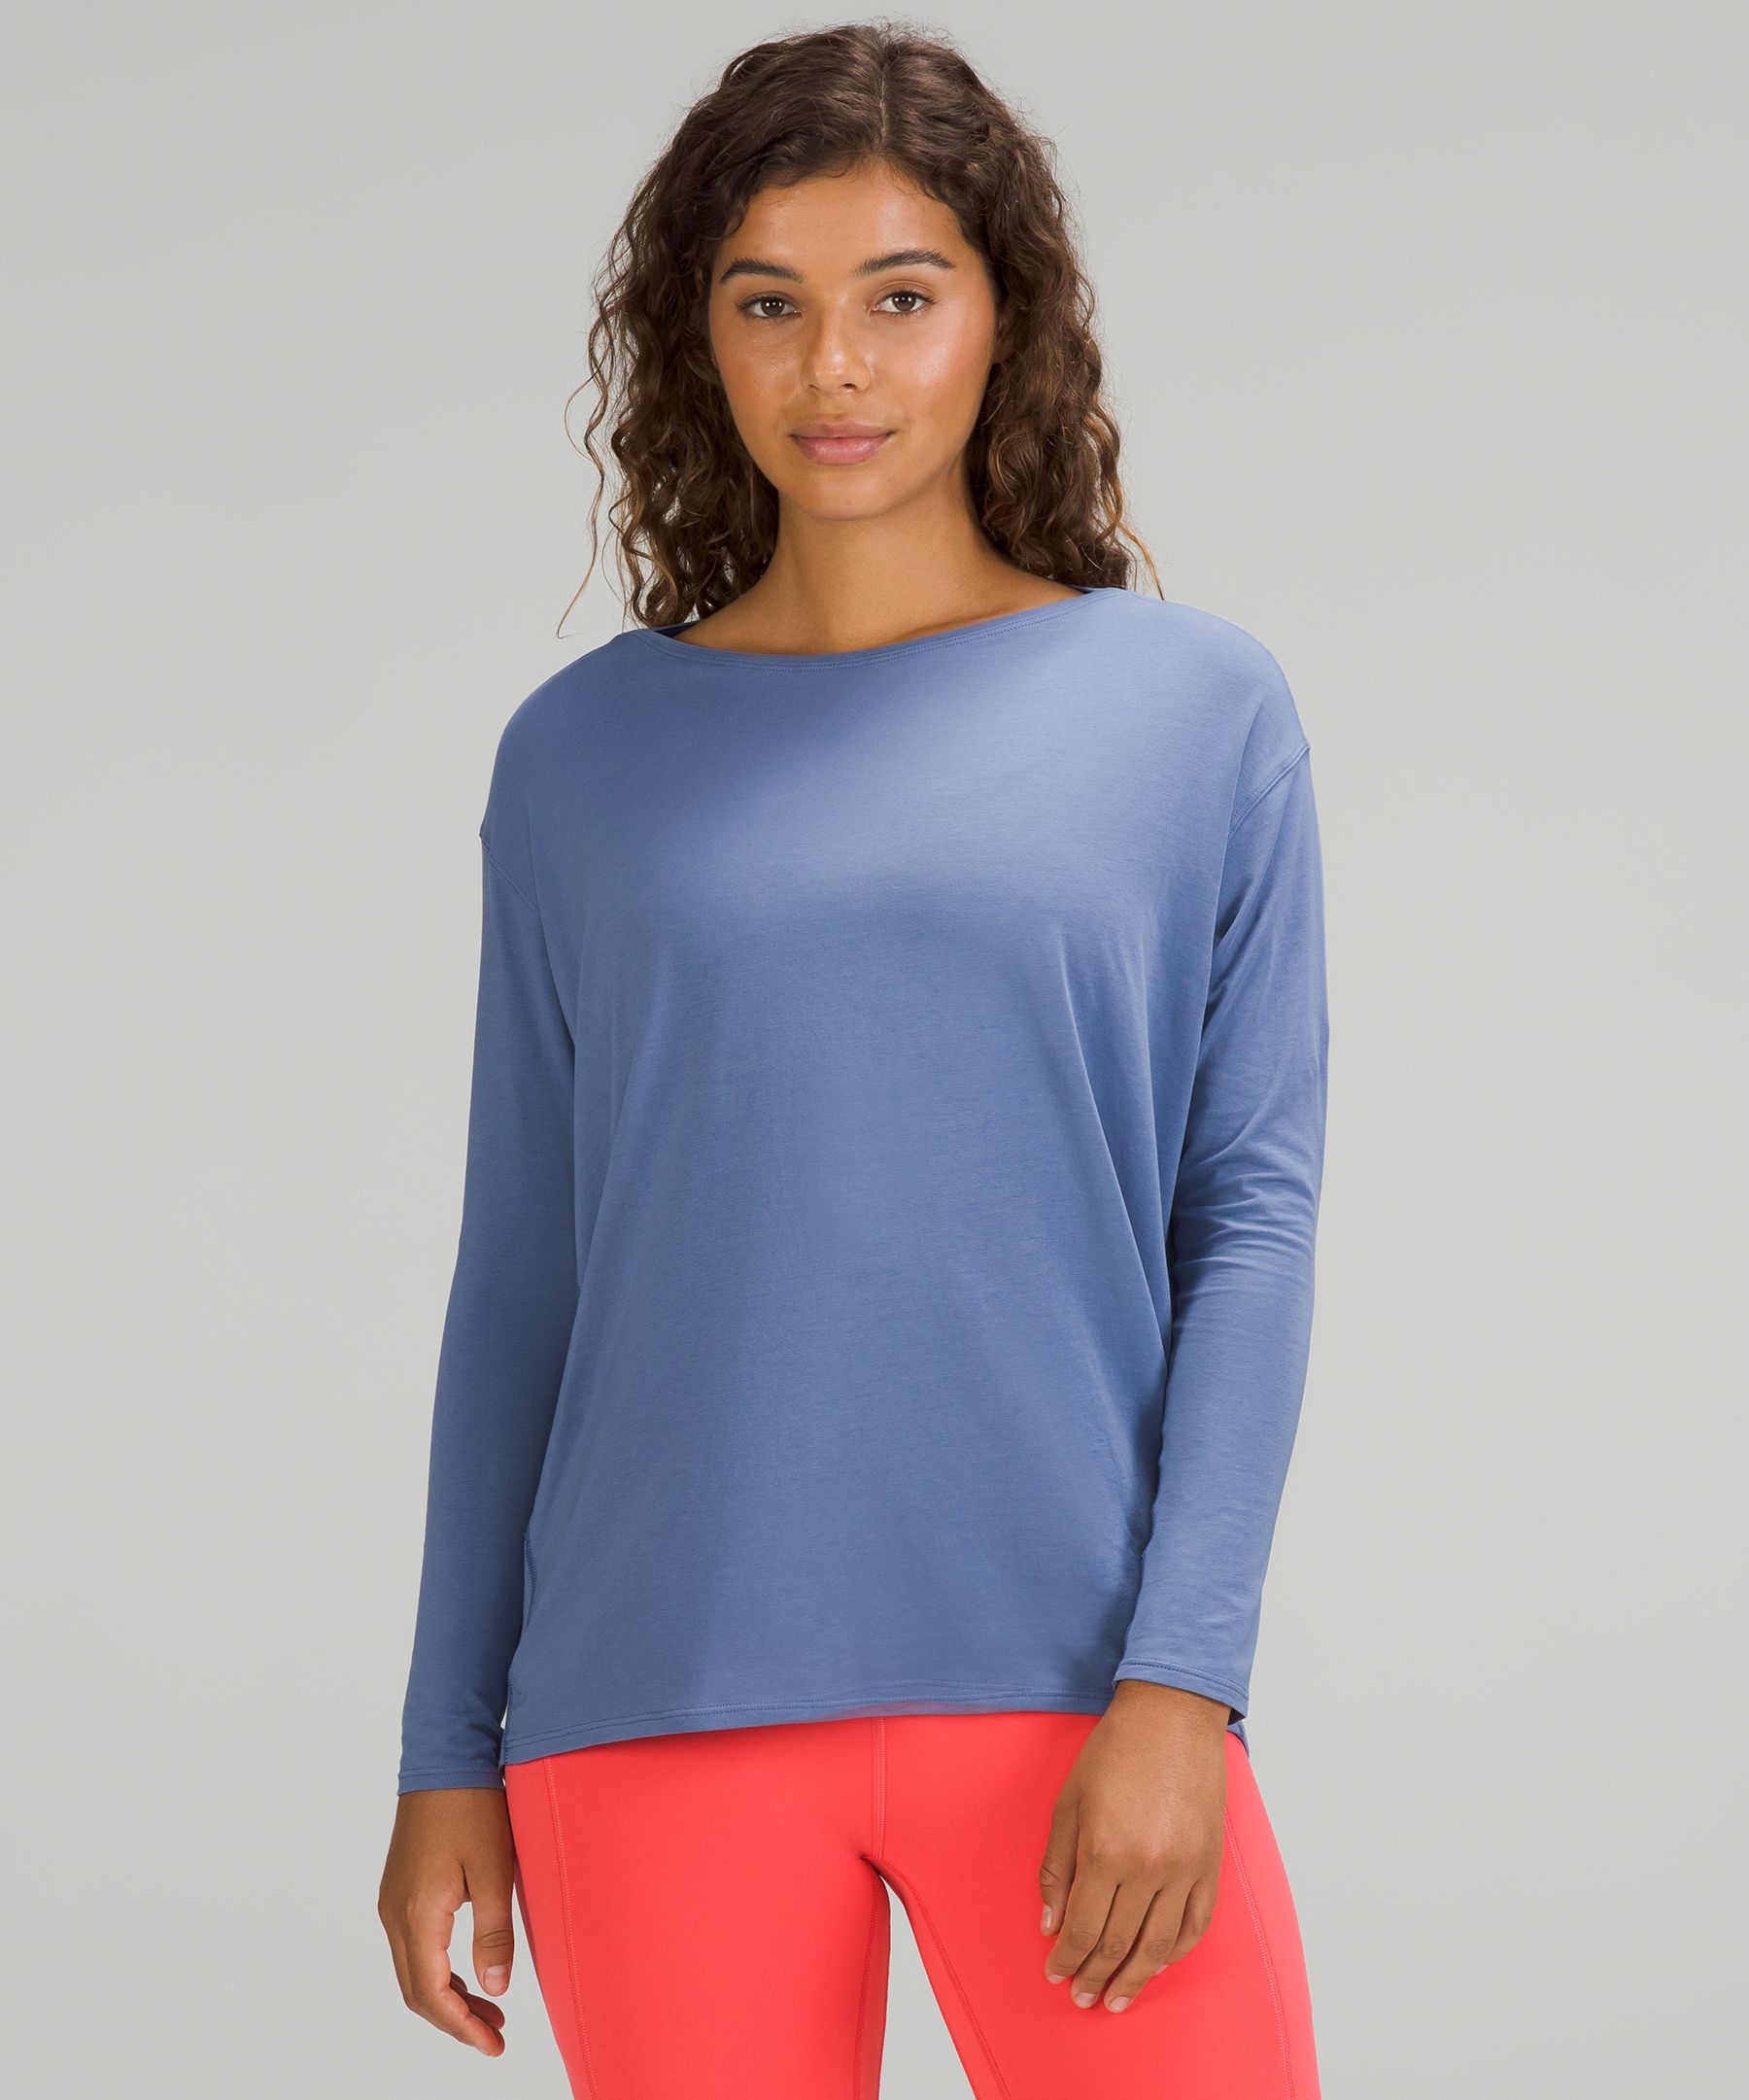 Lululemon Back In Action Long Sleeve Shirt In Water Drop